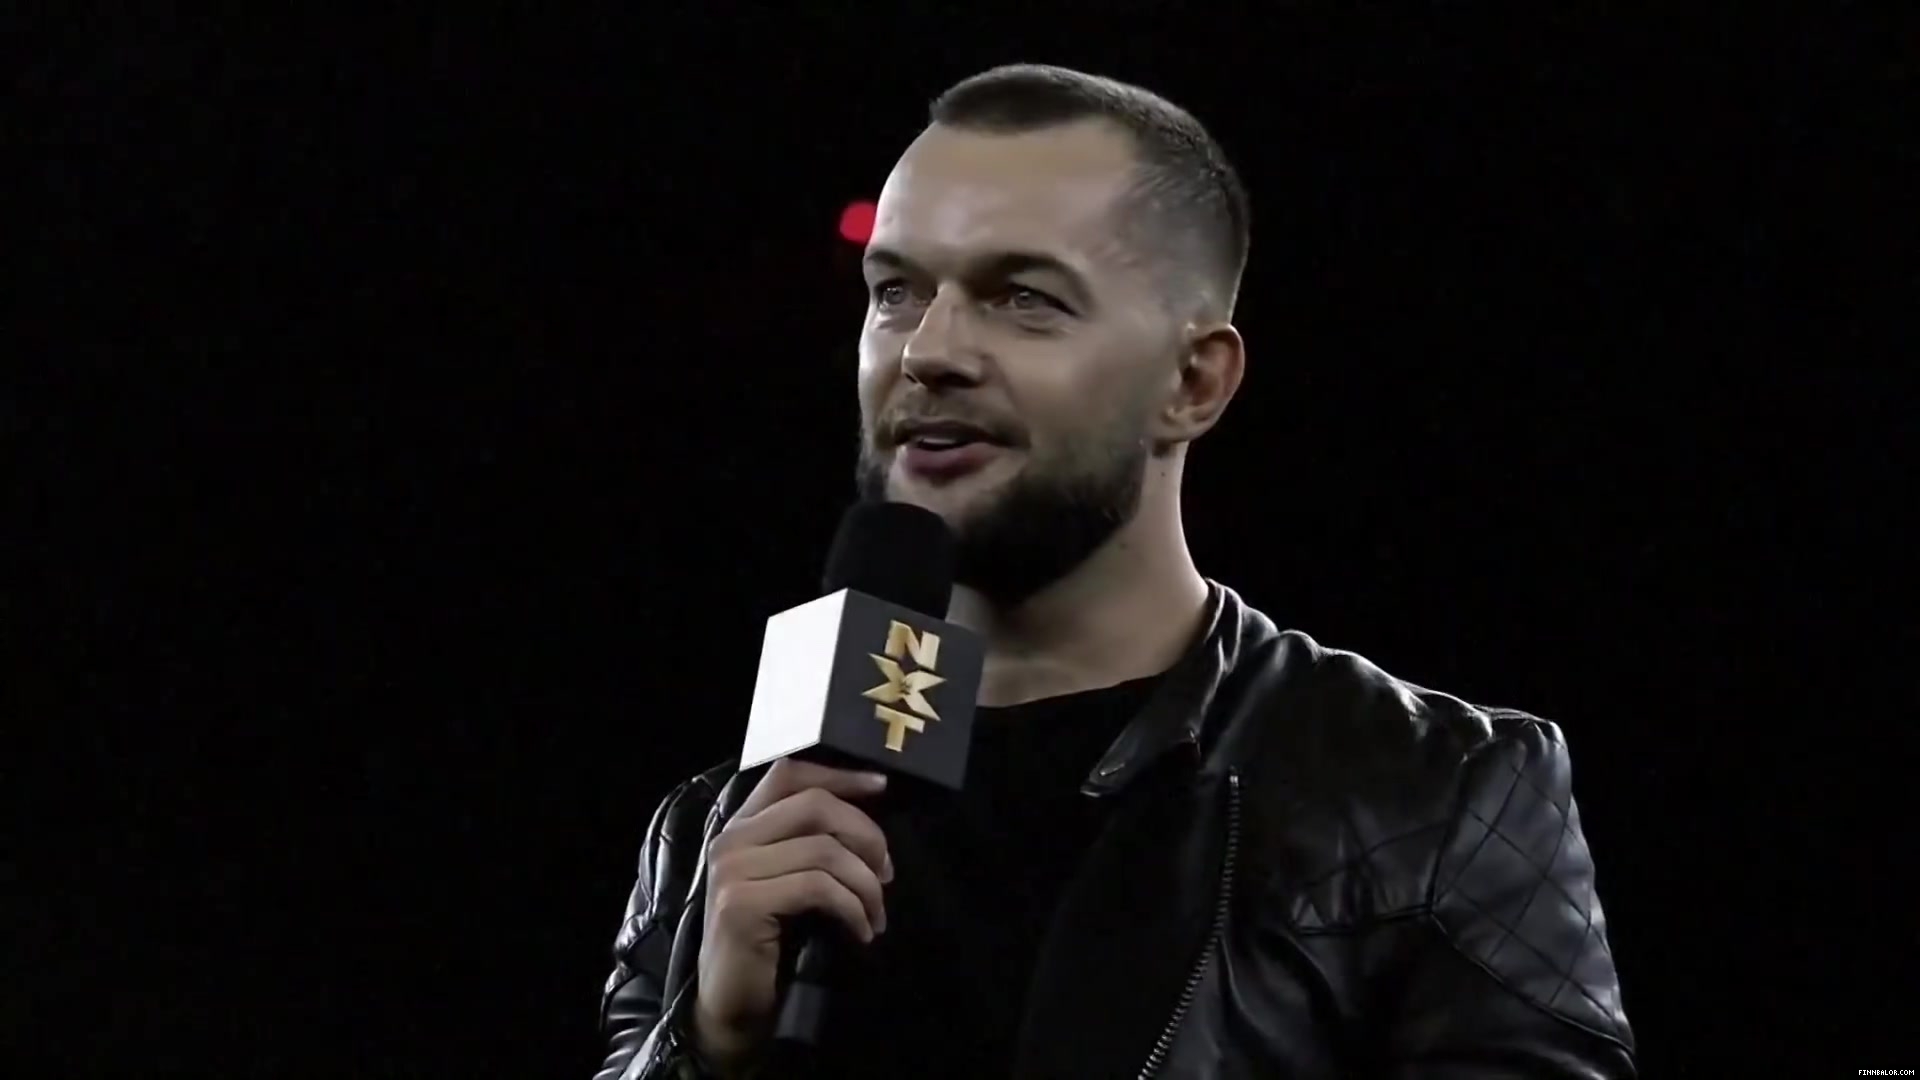 Finn_Balor___The_Rising_of_the_Prince_in_NXT_150.jpg